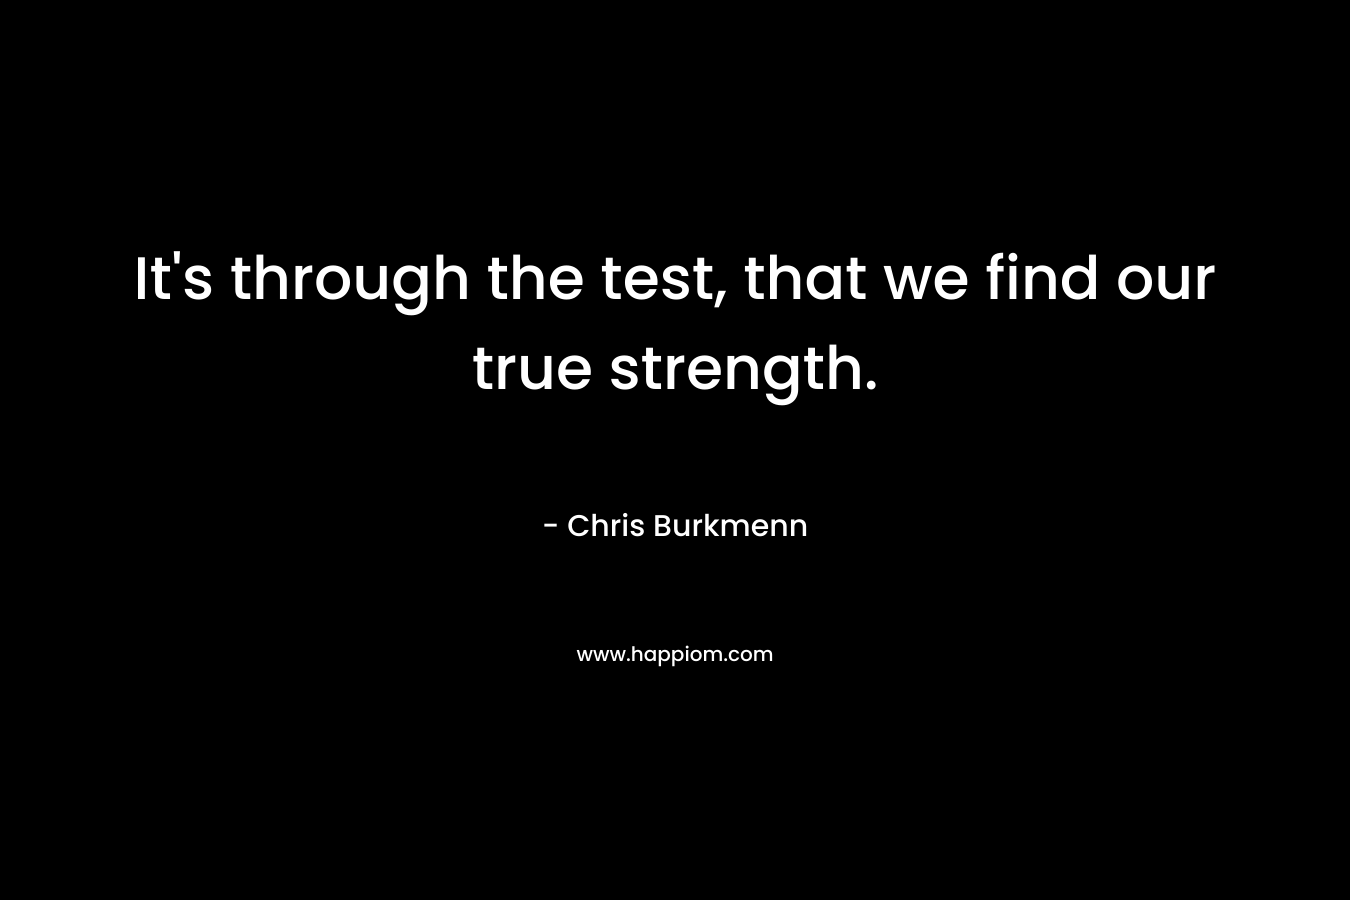 It's through the test, that we find our true strength.